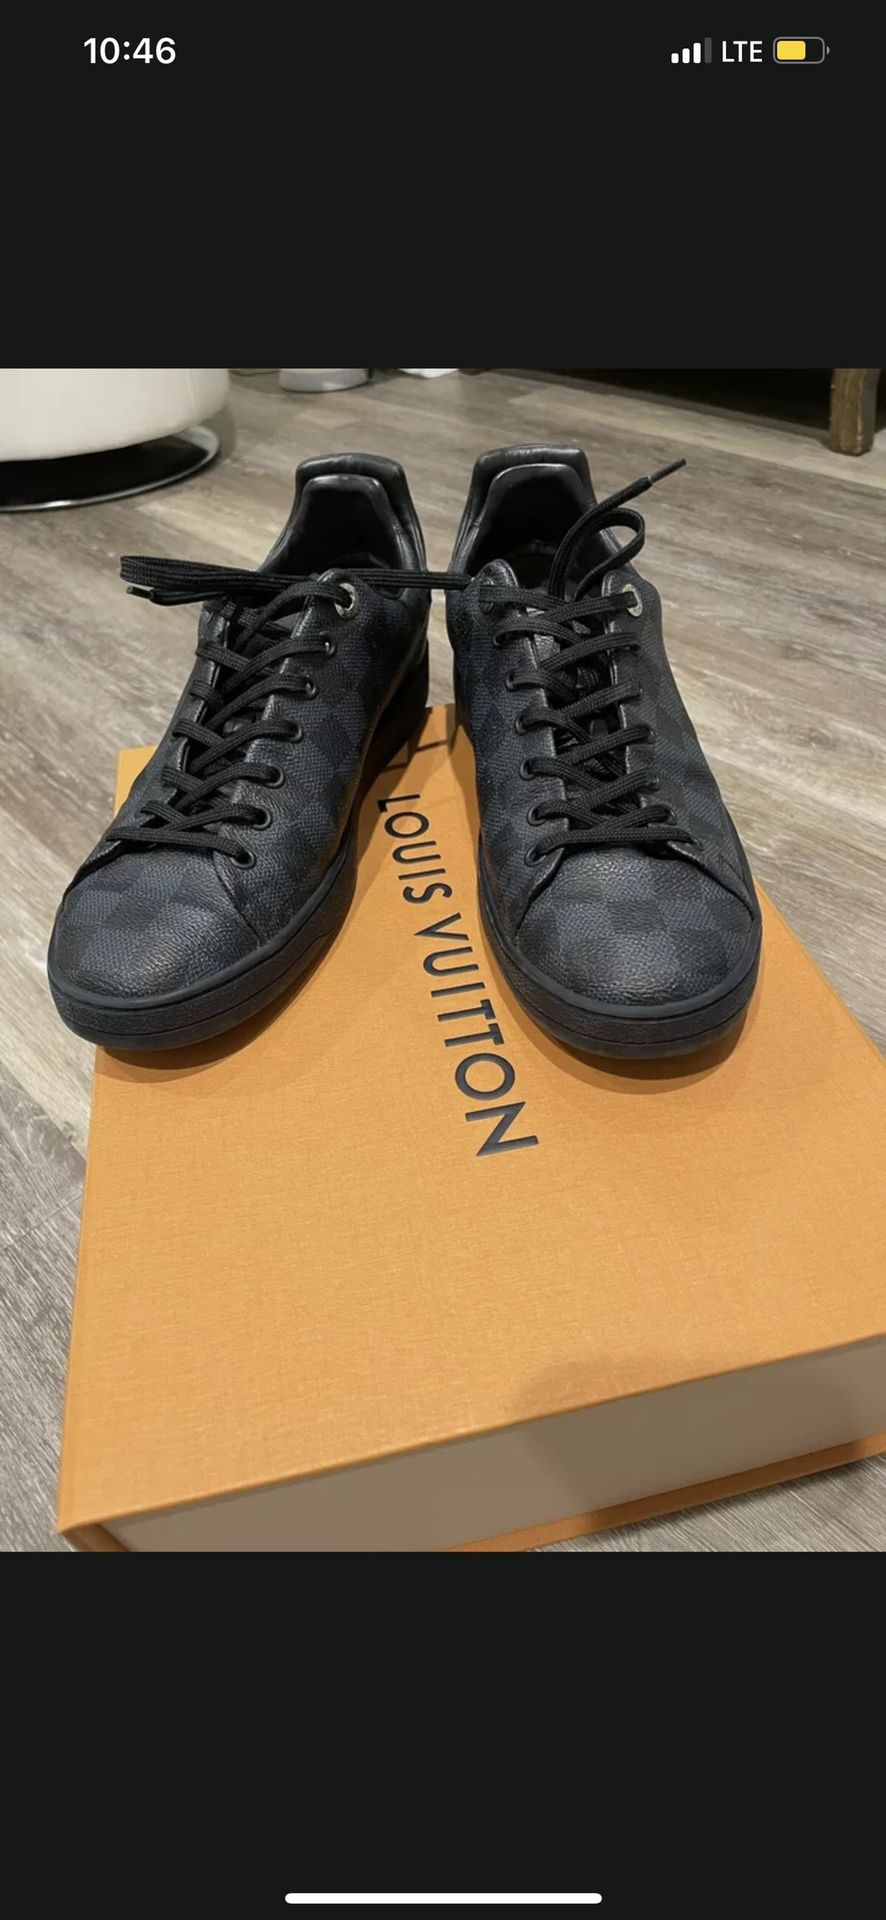 wear louis vuitton frontrow sneaker outfit